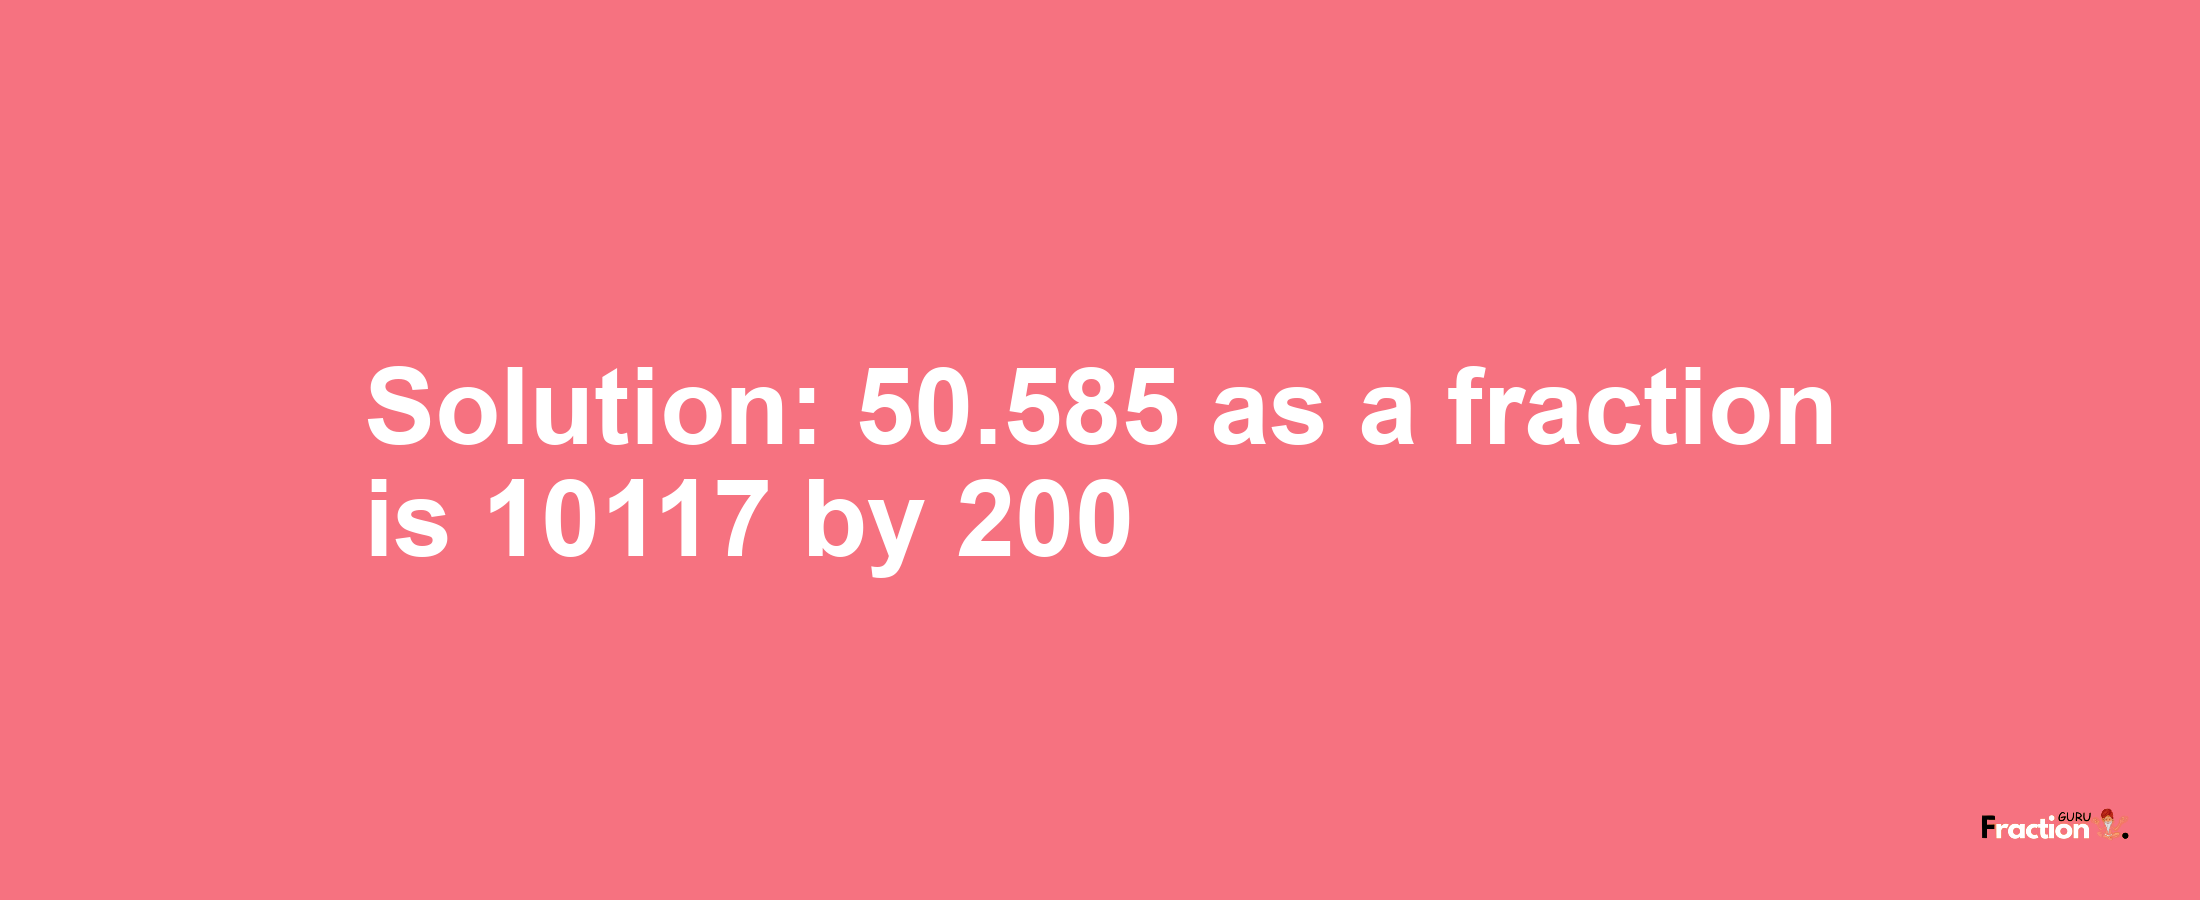 Solution:50.585 as a fraction is 10117/200